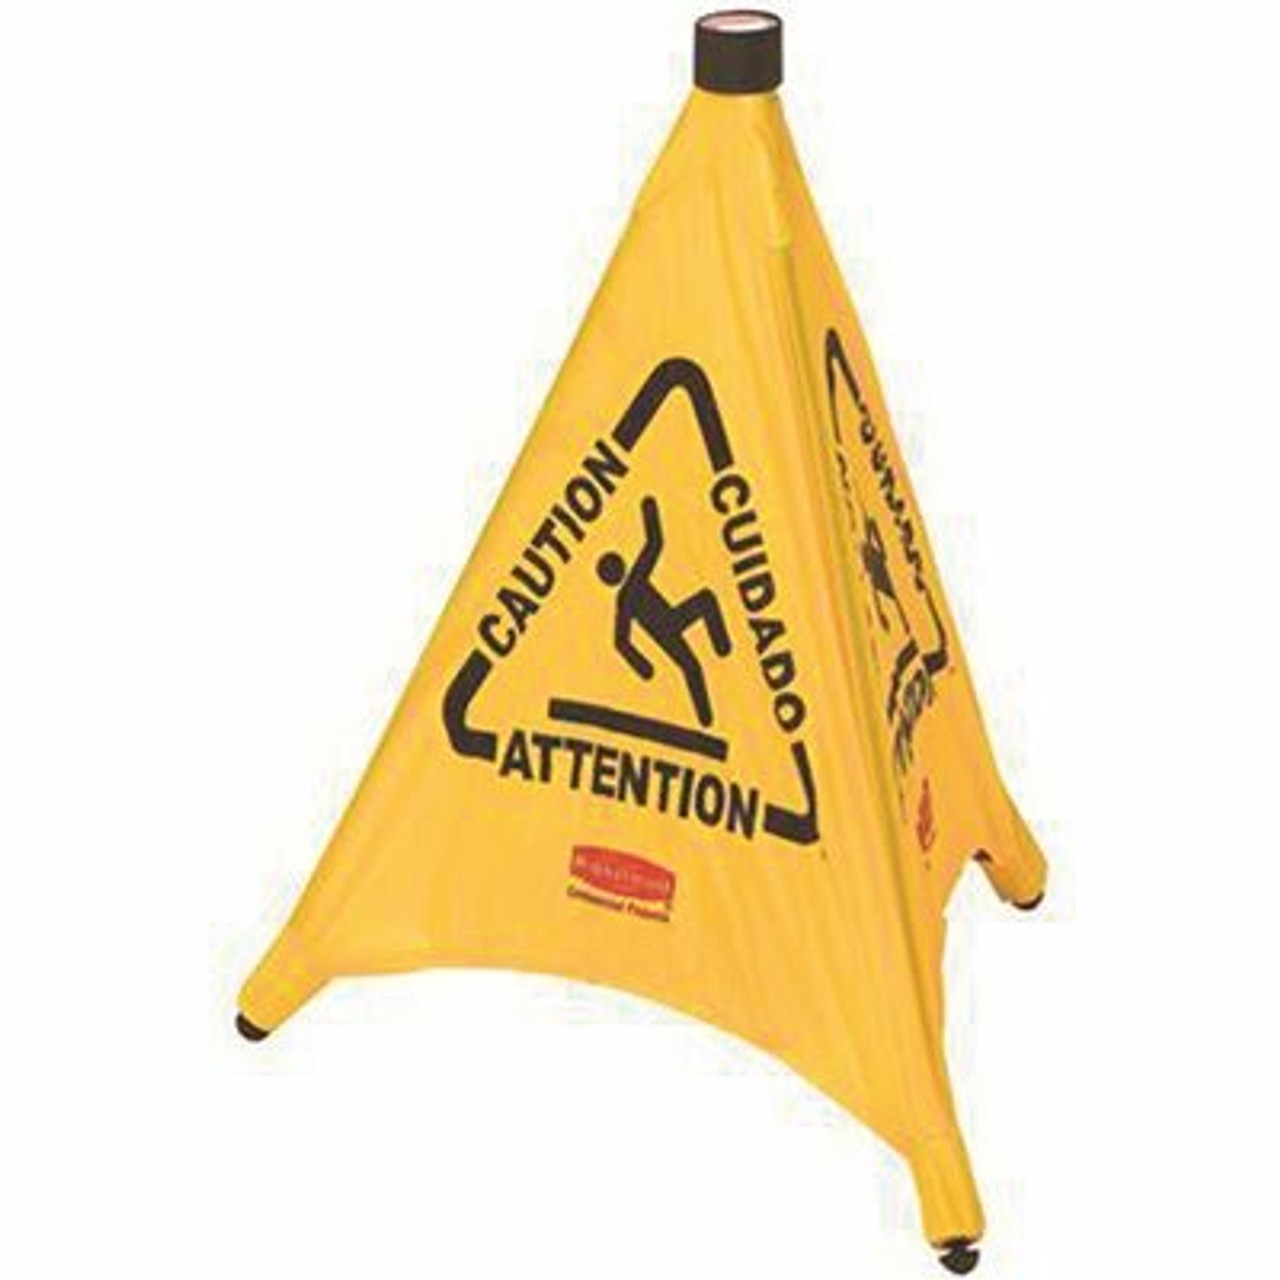 Rubbermaid Commercial Products 30 In. Safety Pop-Up Multi Lingual Caution Cone In Yellow